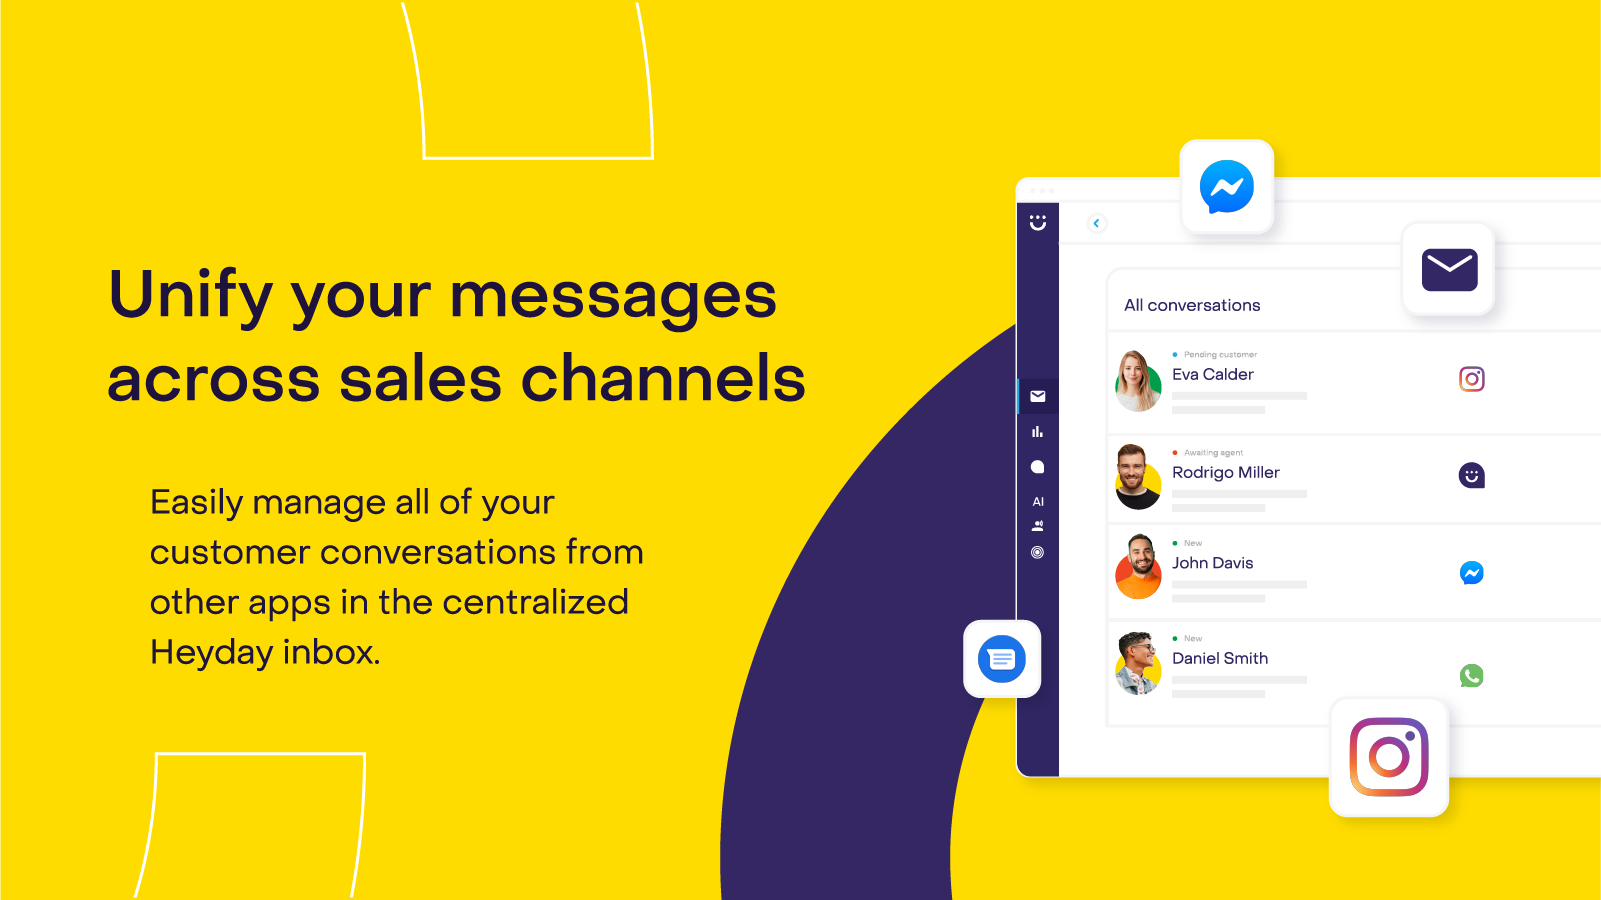 Easily manage all of your customer conversations from other apps in the centralized Heyday inbox.